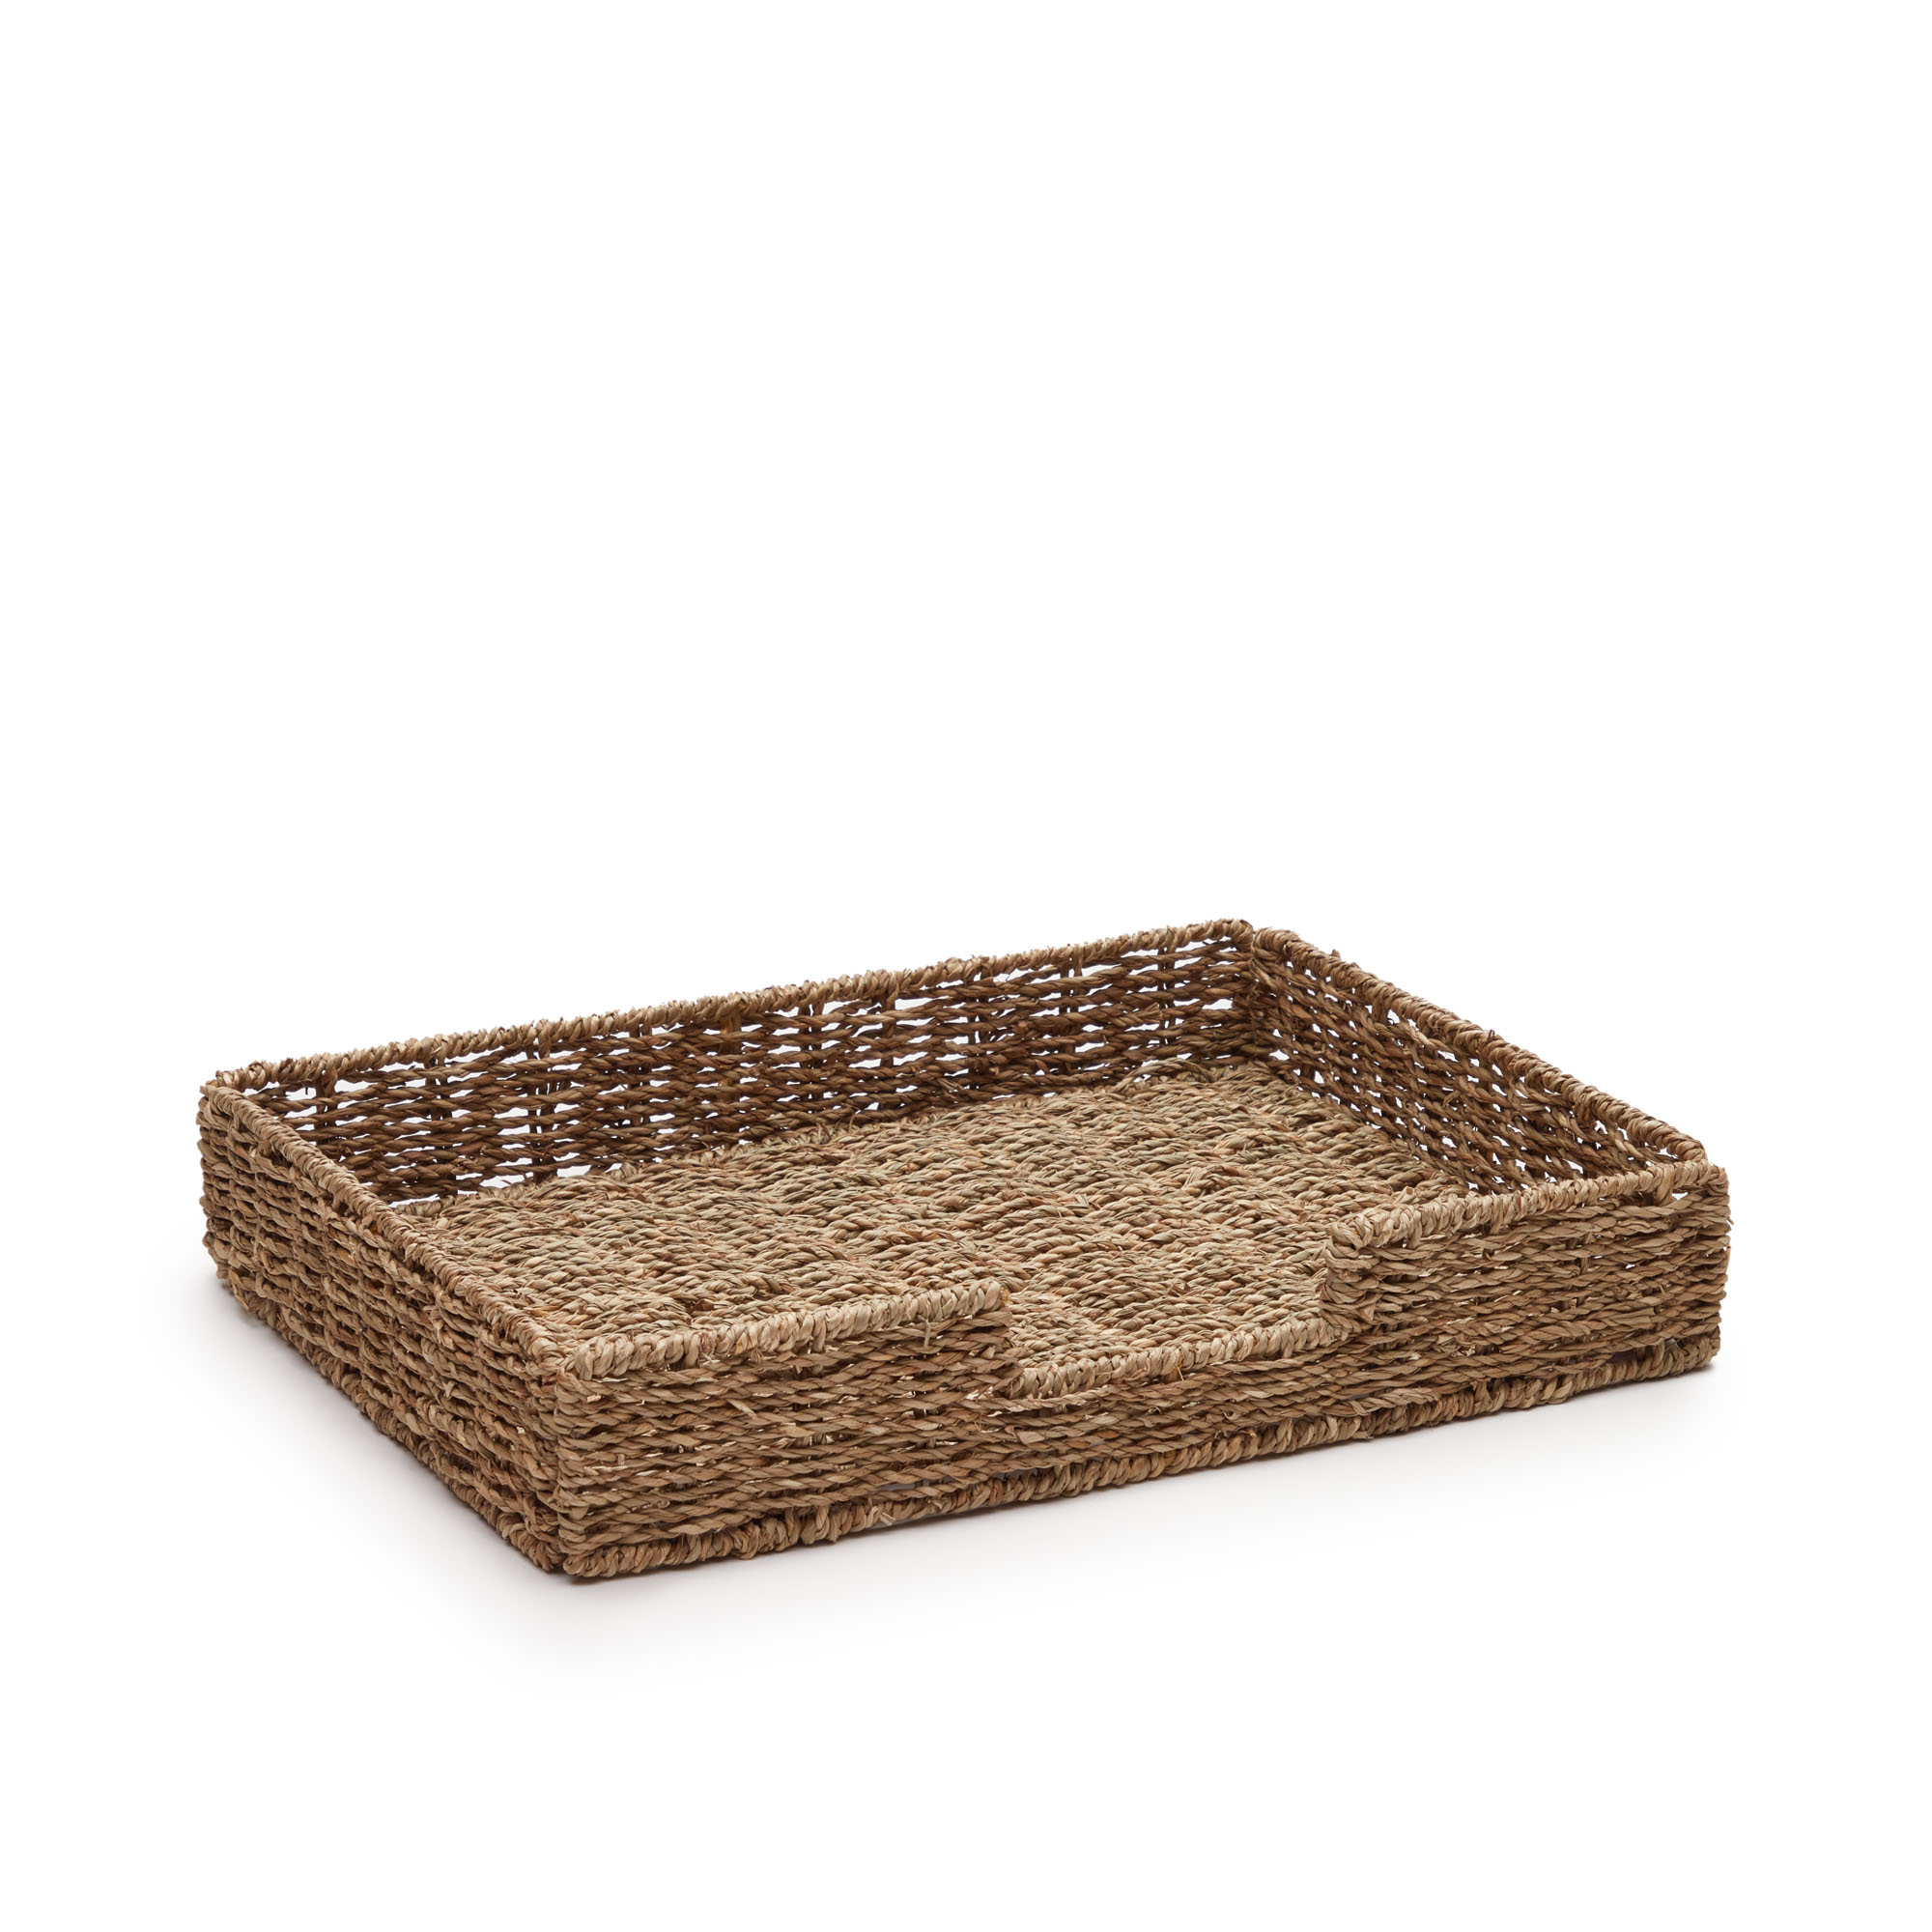 Fliicker storage tray for pet accessories made from natural fibres 